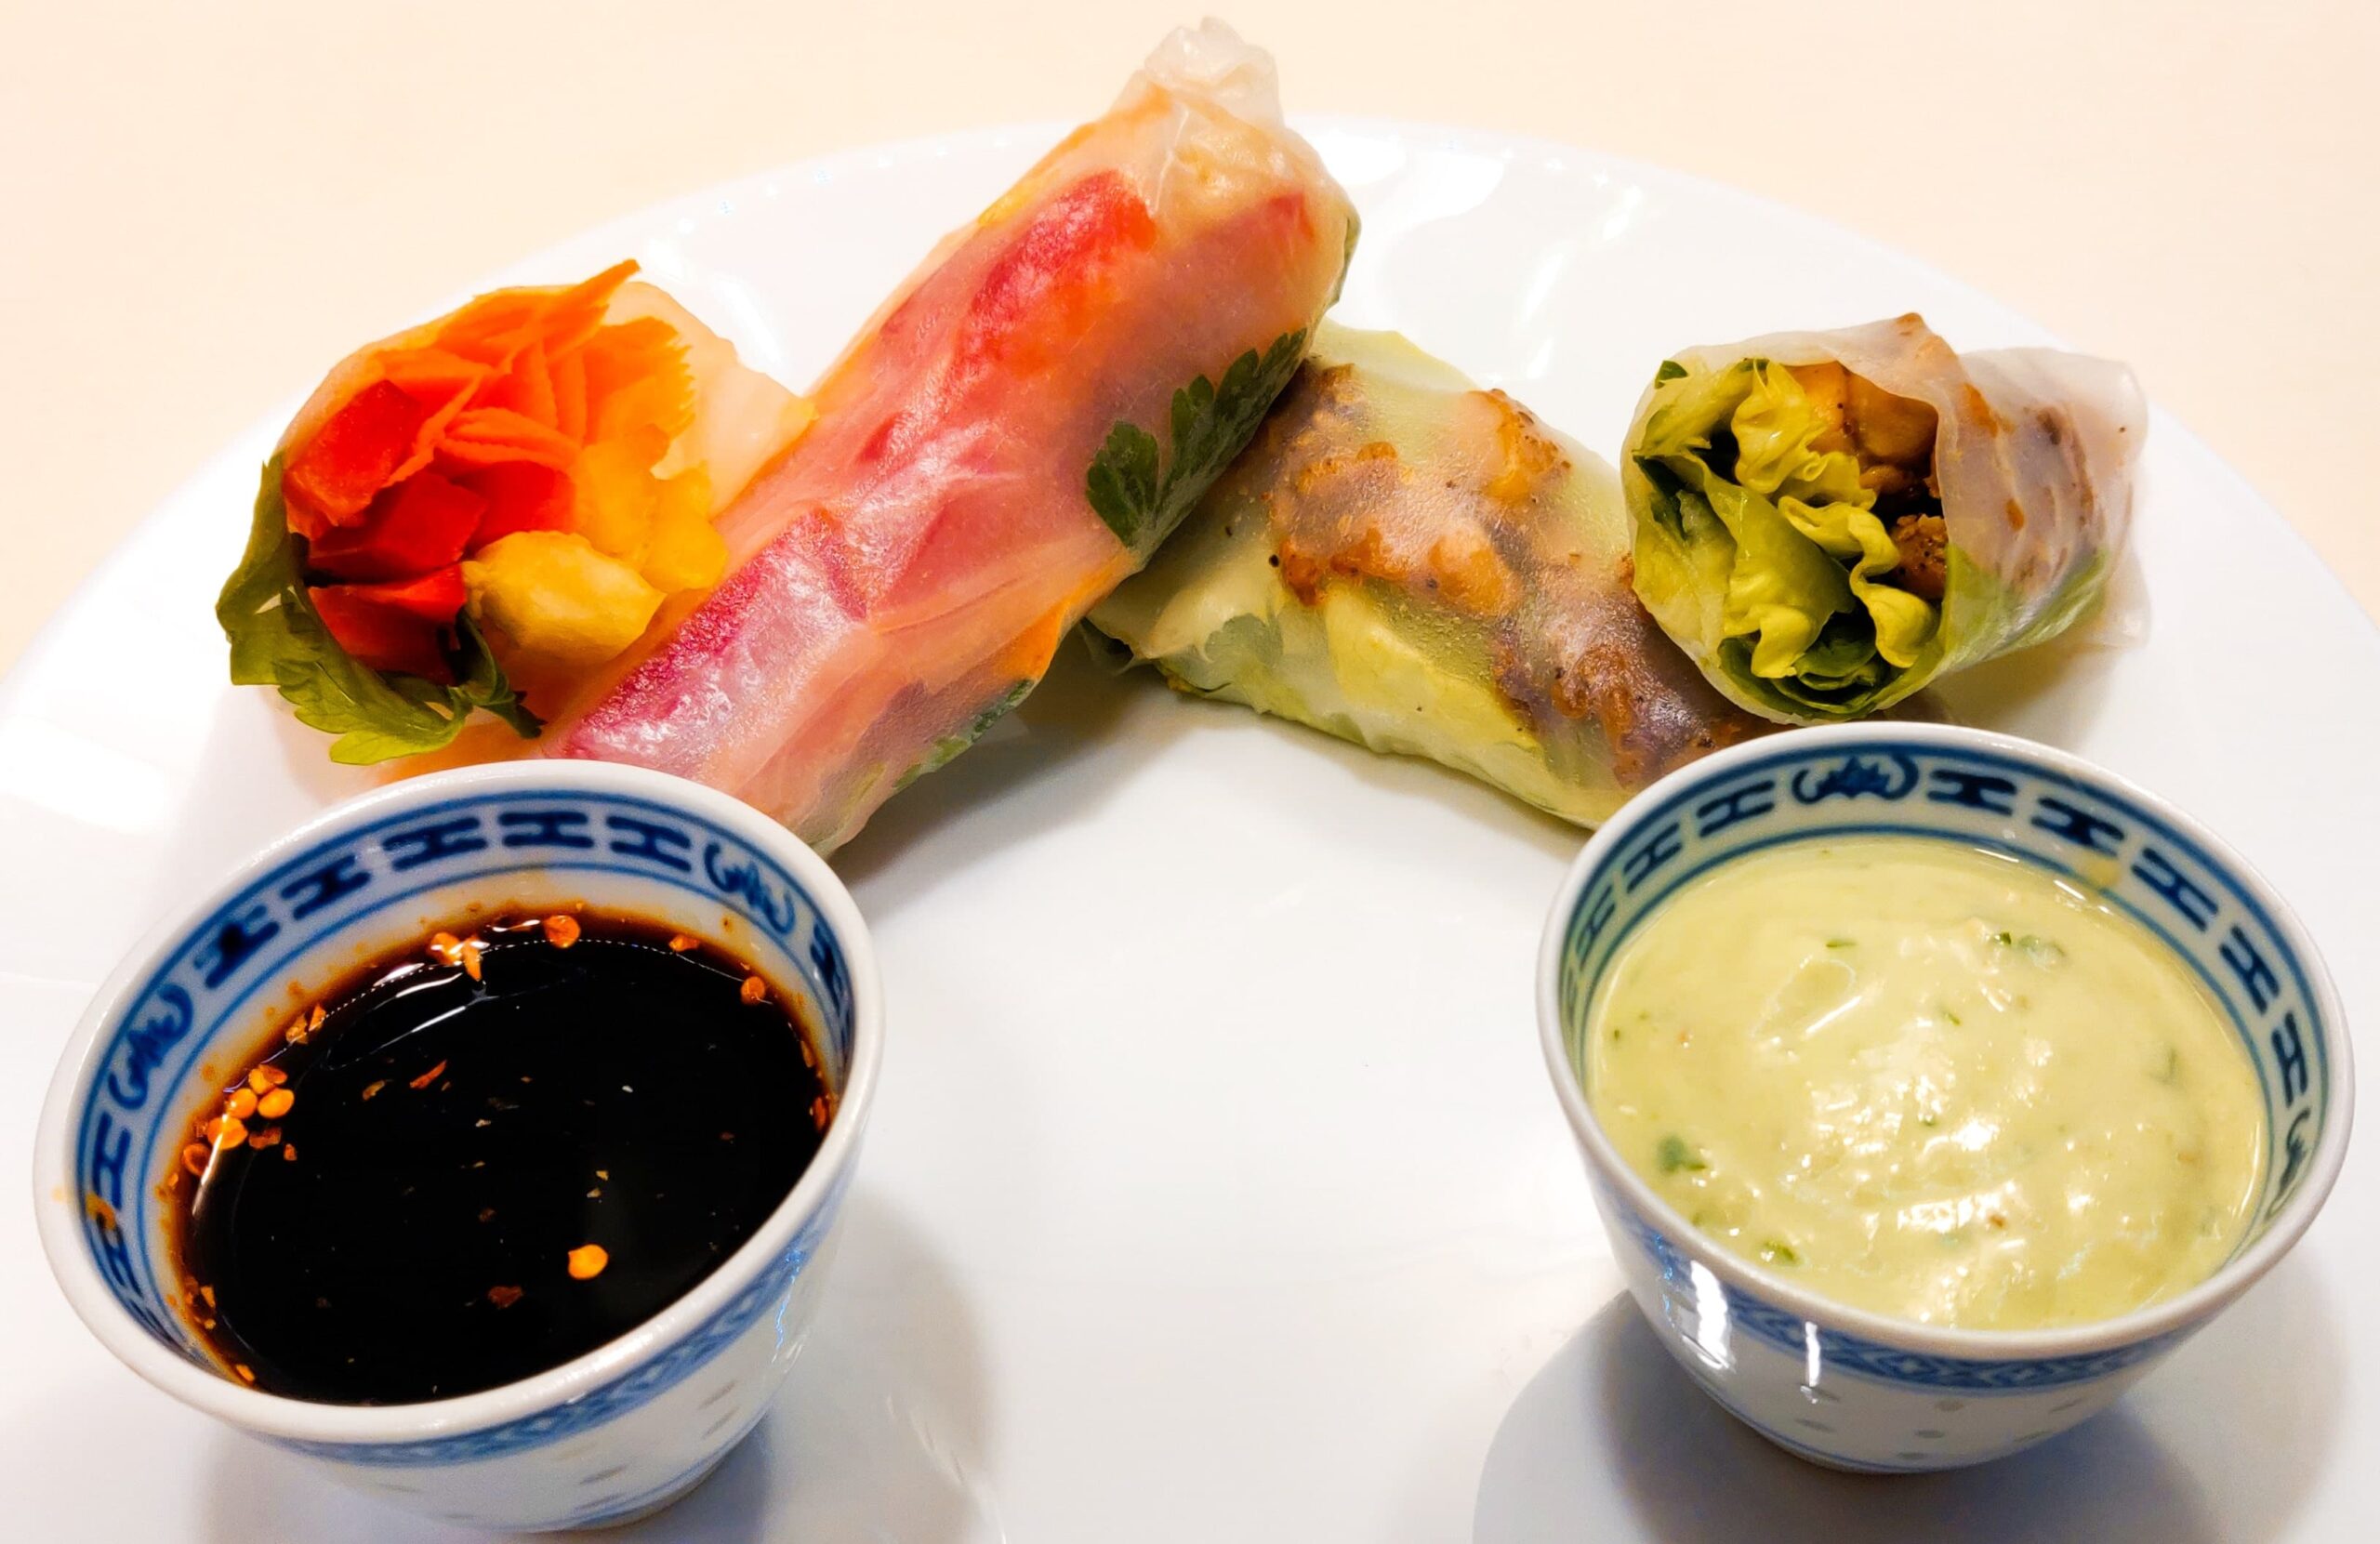 A front view of a 2 chicken spring rolls and 2 vegetable spring rolls, served with a soy sauce and an avocado sauce